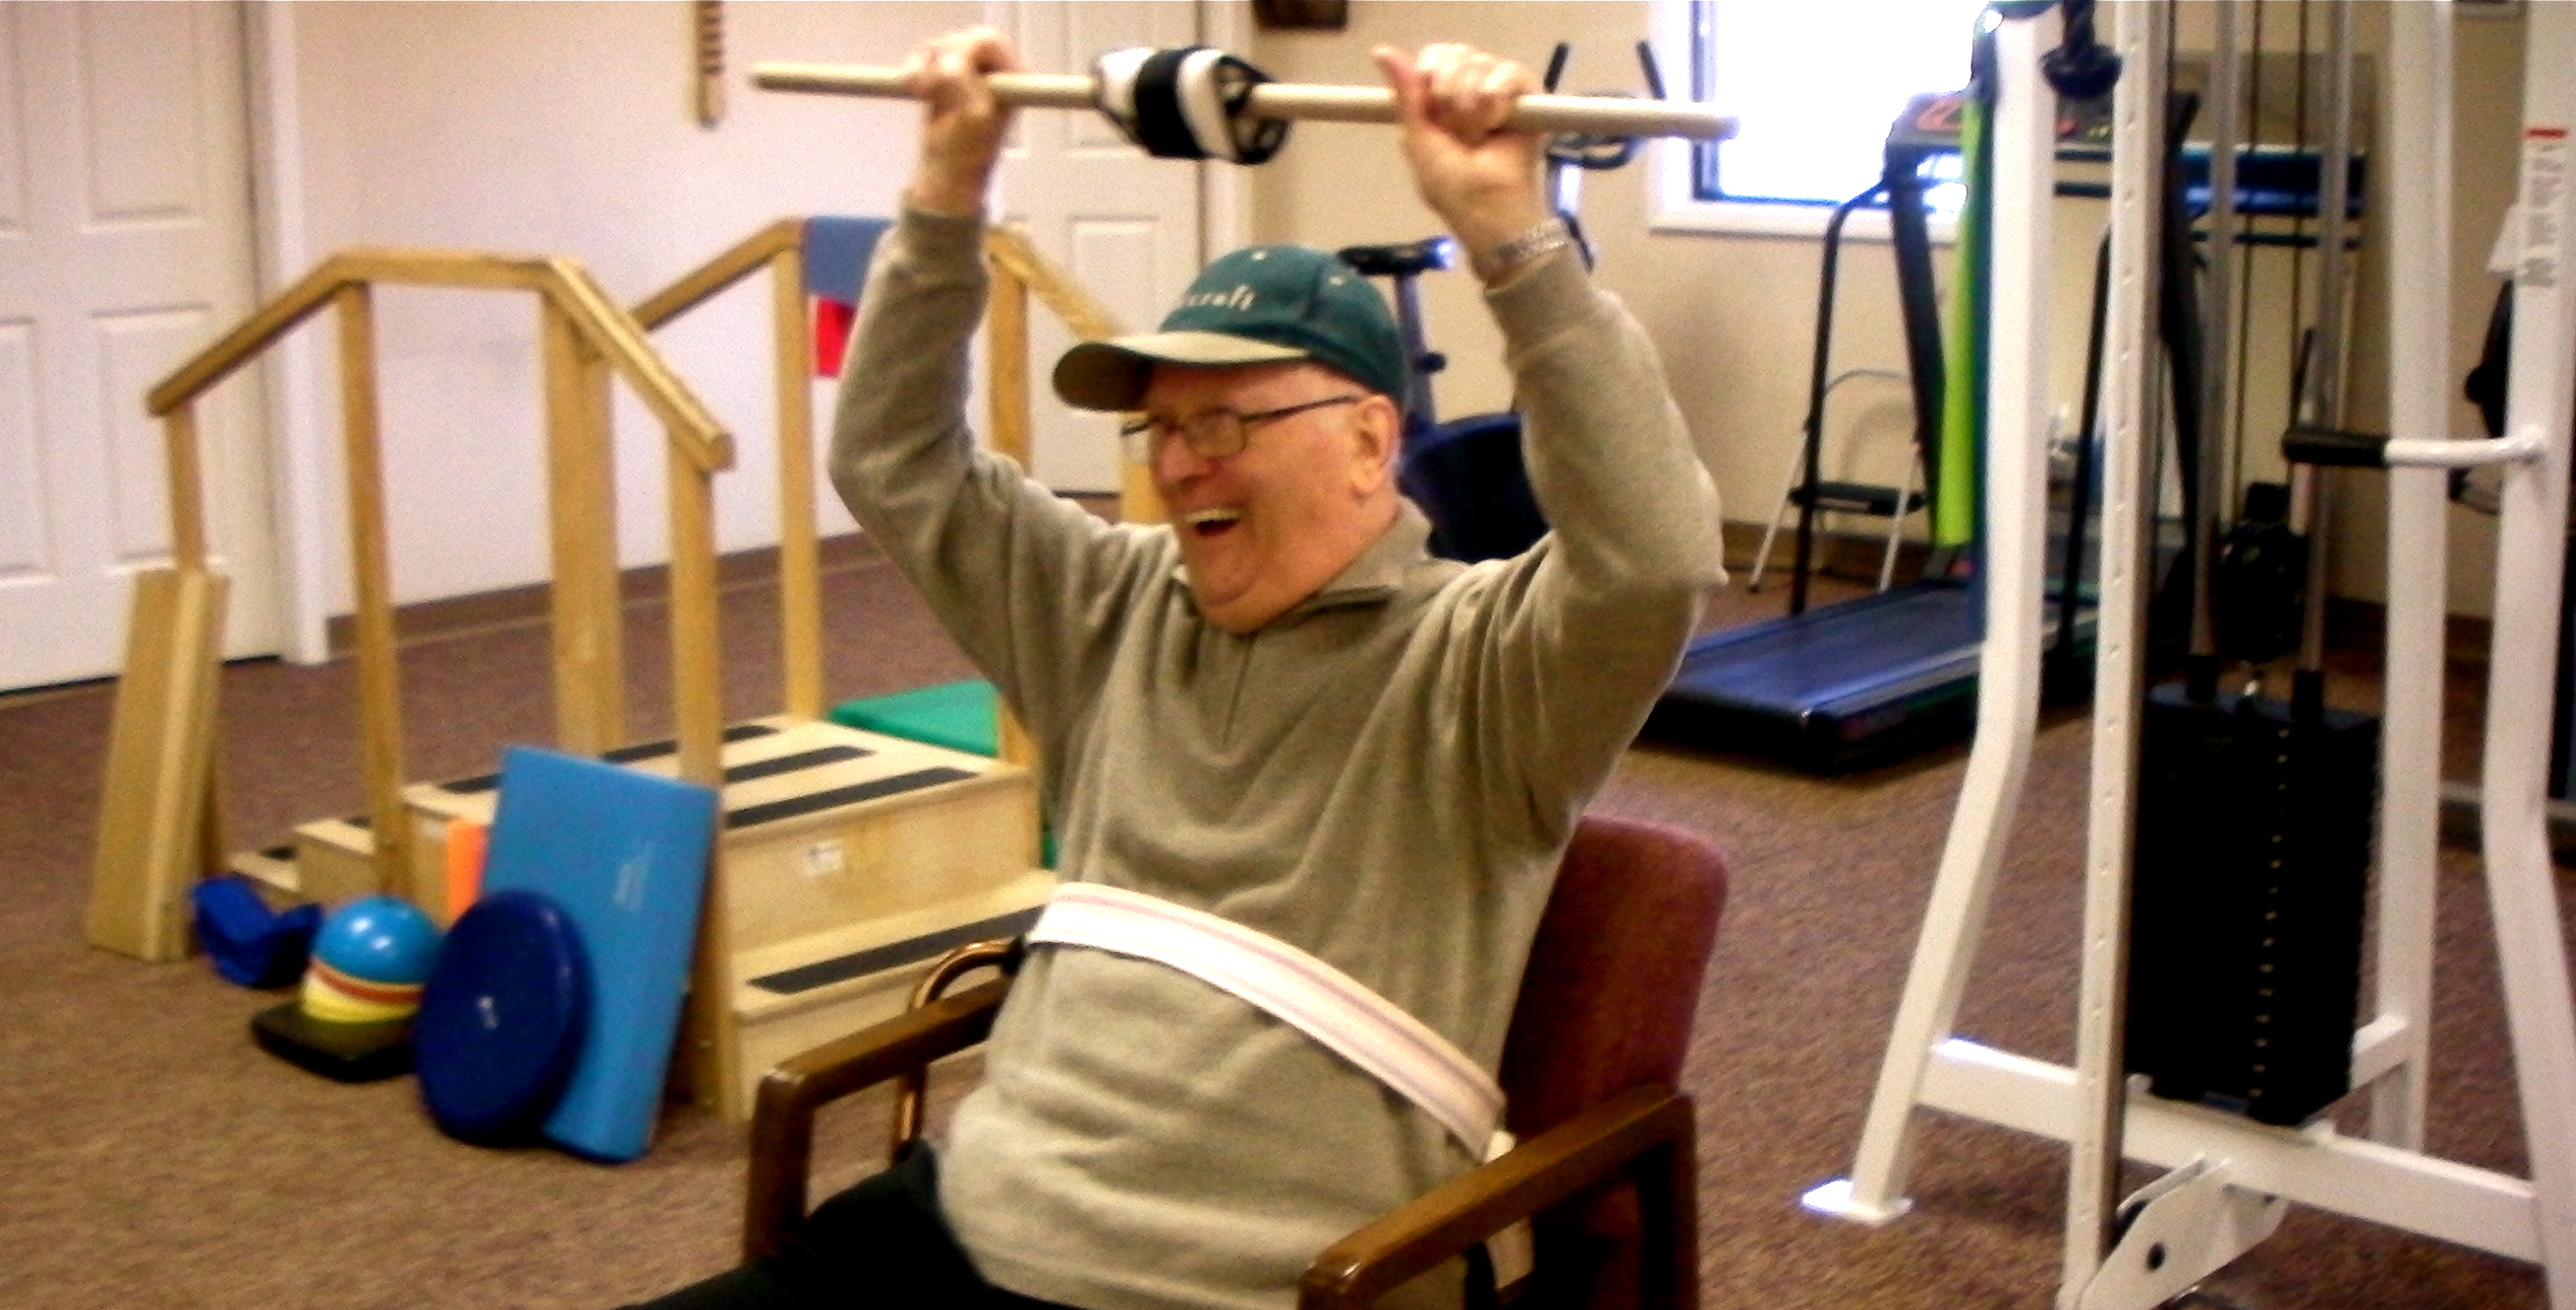 A physical and occupational therapy patient at DOAR Central in Danville, Virginia